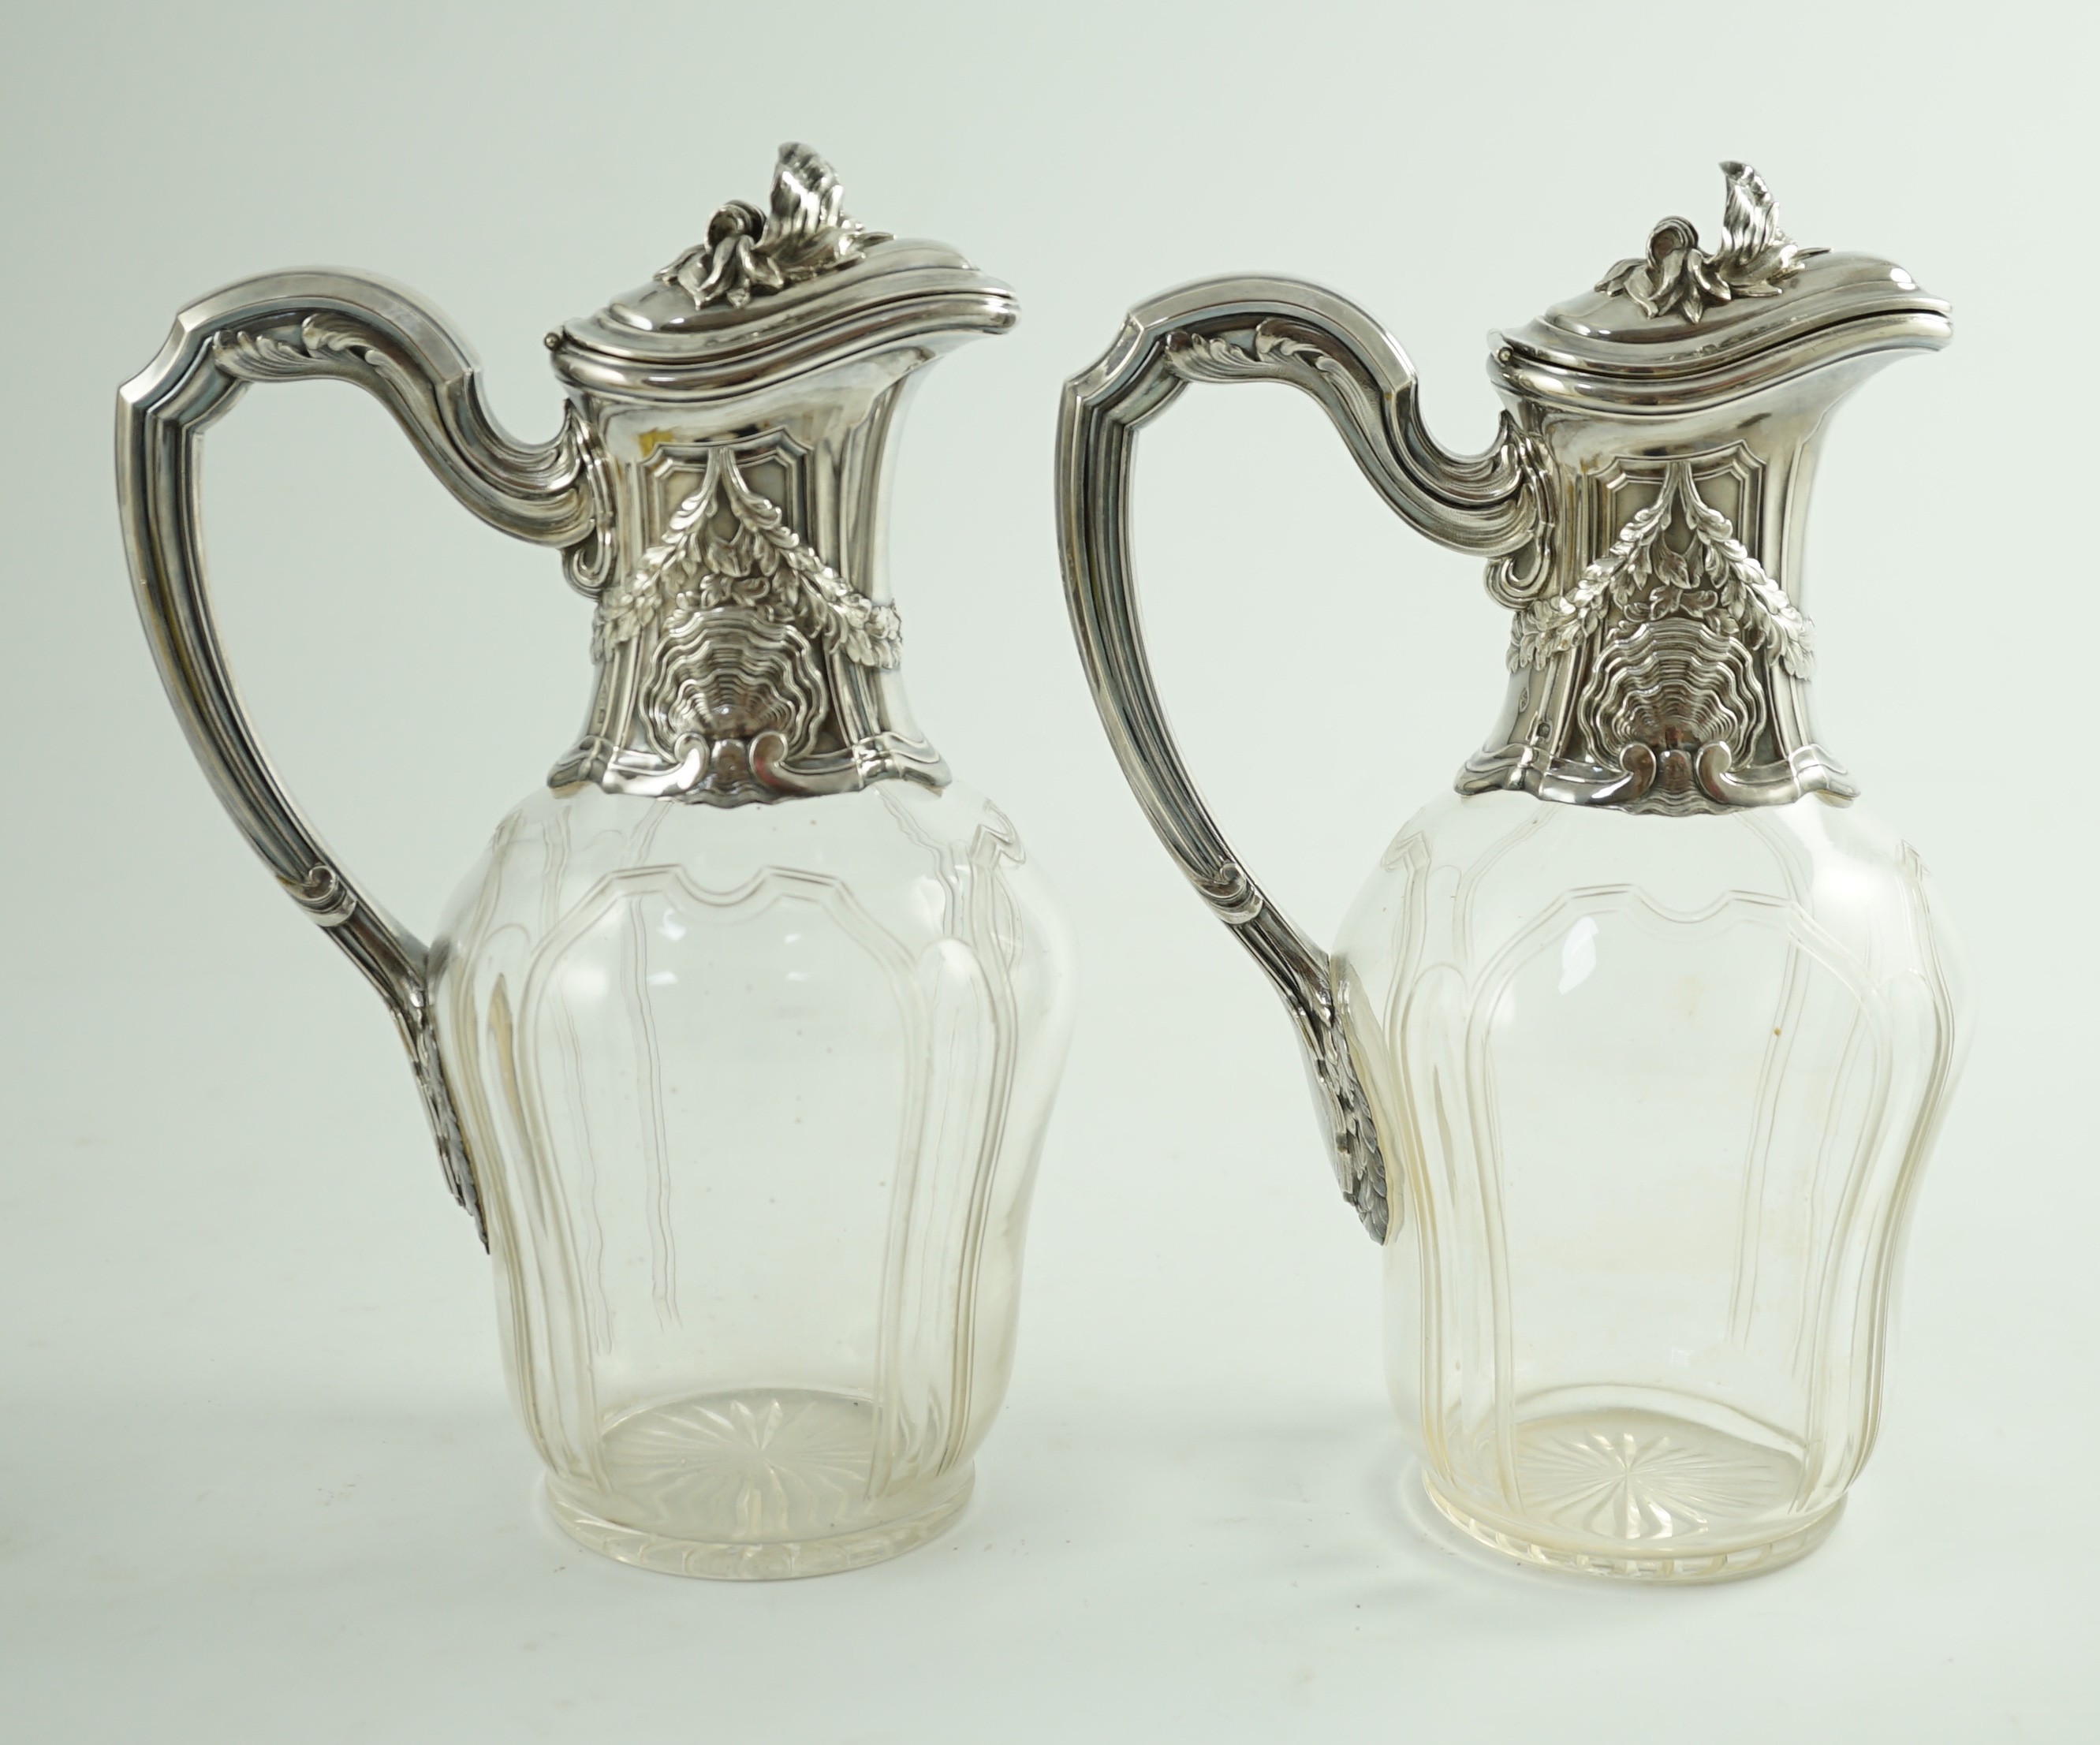 A pair of early 20th century French 950 standard silver mounted glass claret jugs, by Risler & Carre